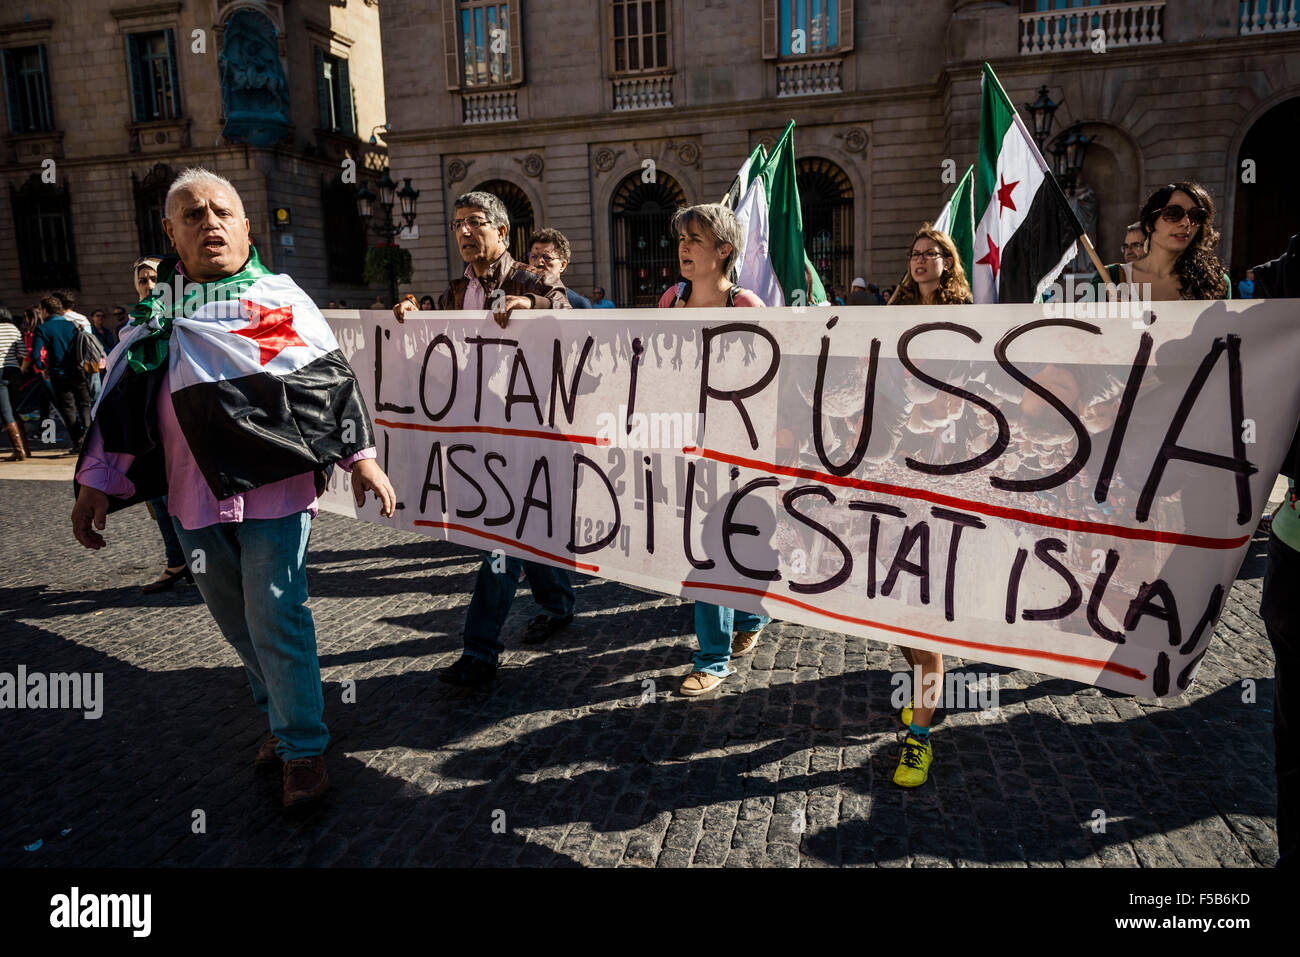 October 31st, 2015. Barcelona, Spain: Pro-palestine demonstrators protest behind their banner in Barcelona to against the NATO, Russia, Assad and the ISIS. Stock Photo